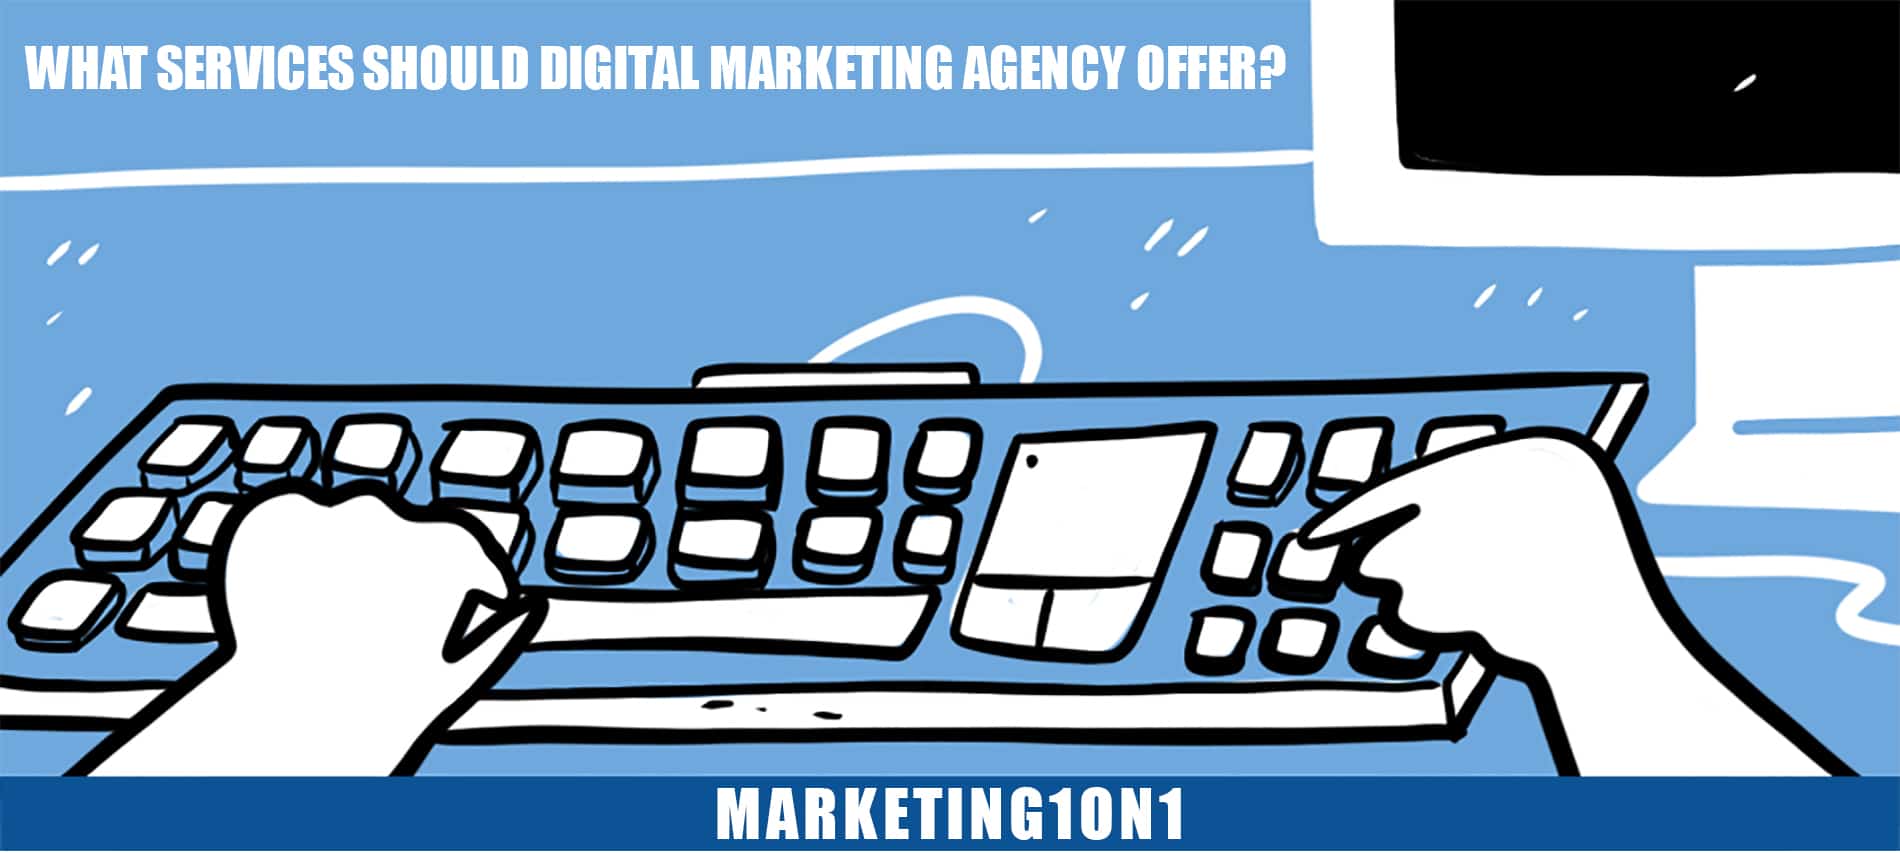 What services should digital marketing agency offer?